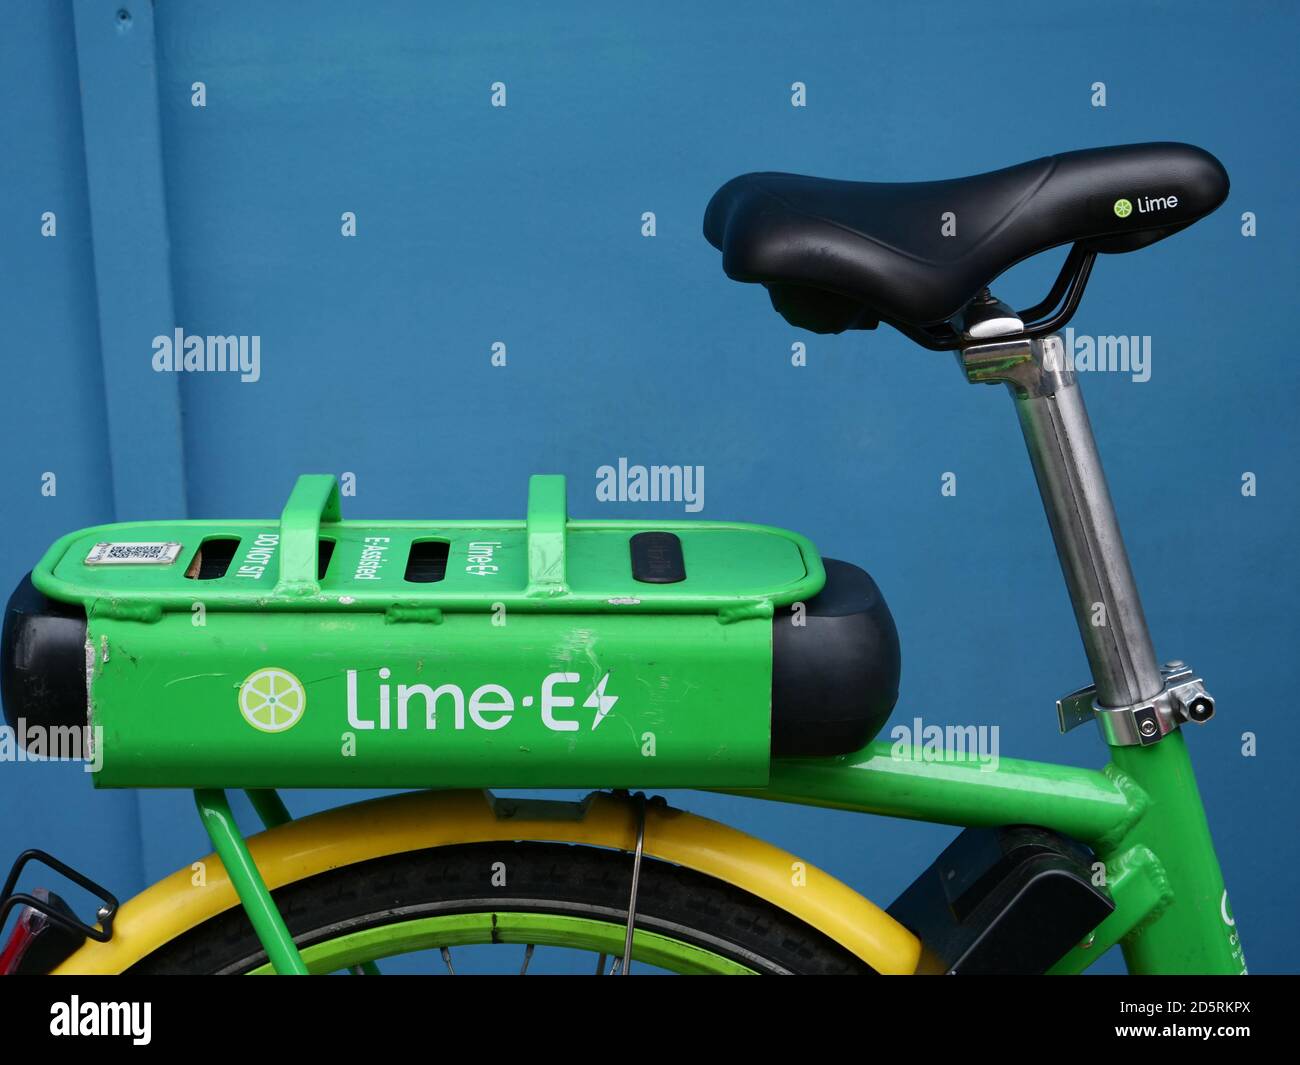 Close up and detail of a Lime electric bike seen against a blue background. Stock Photo